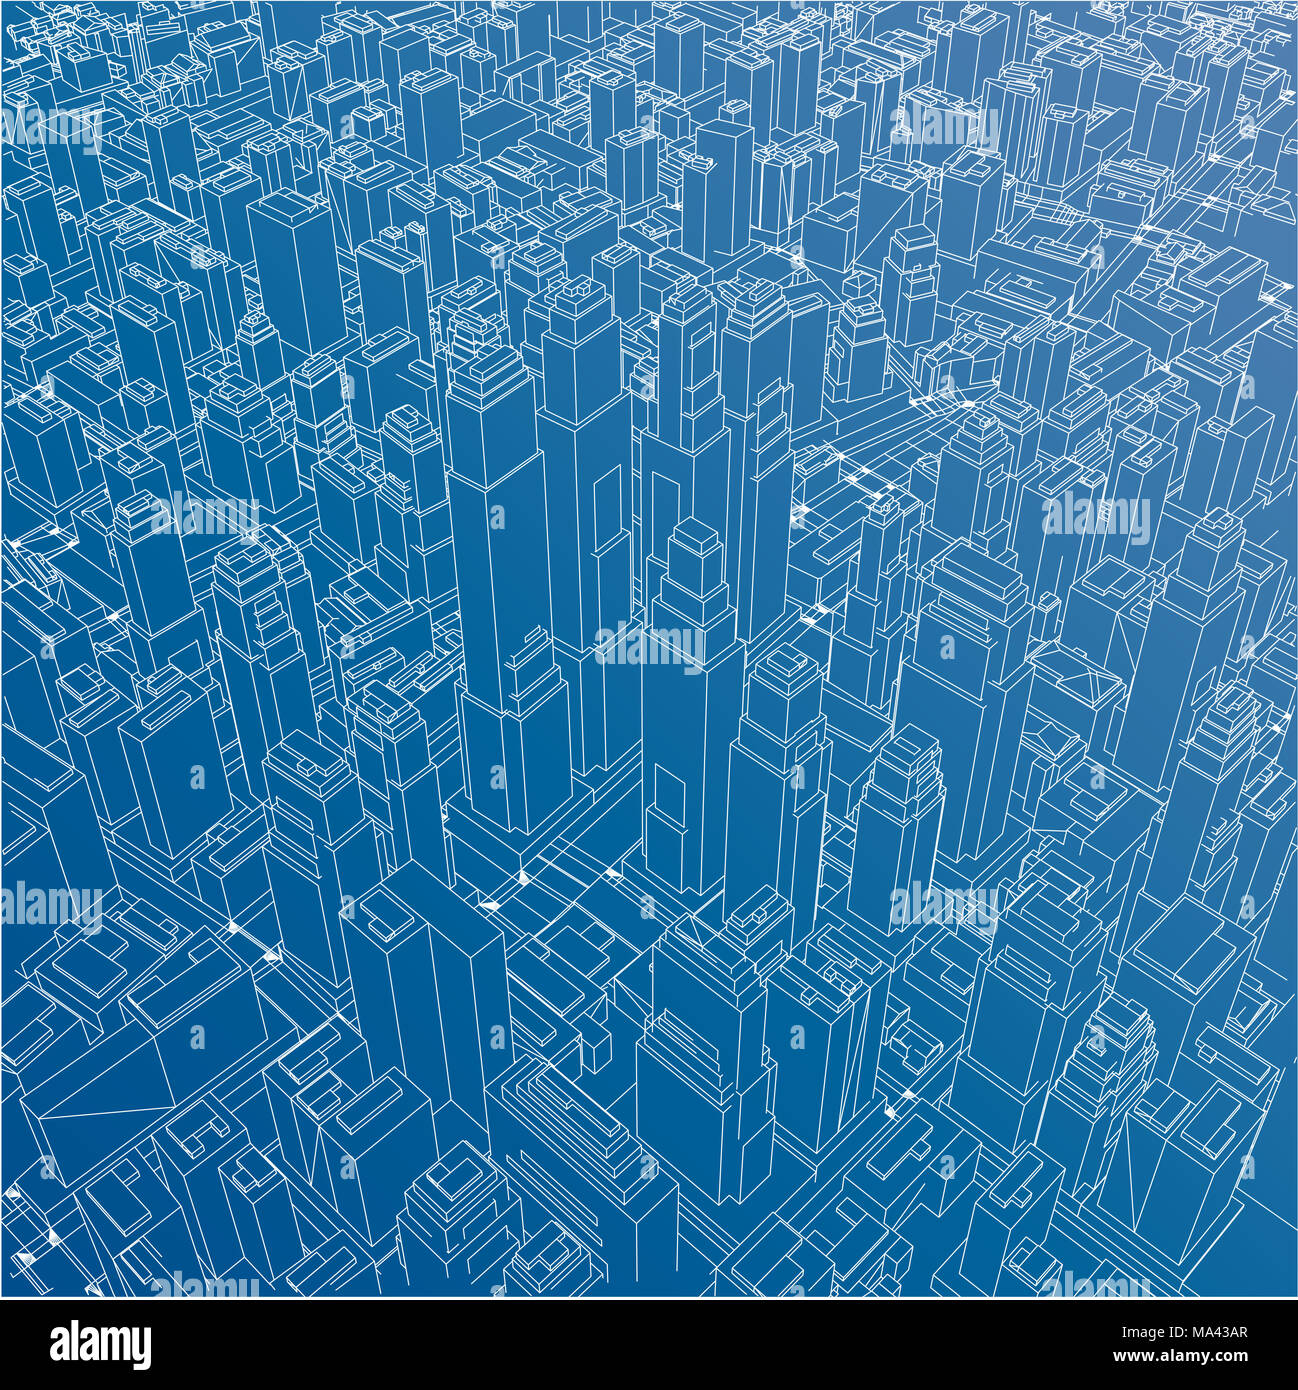 Wire-frame City, Blueprint Style. 3D Rendering. Architecture Design Background Stock Photo